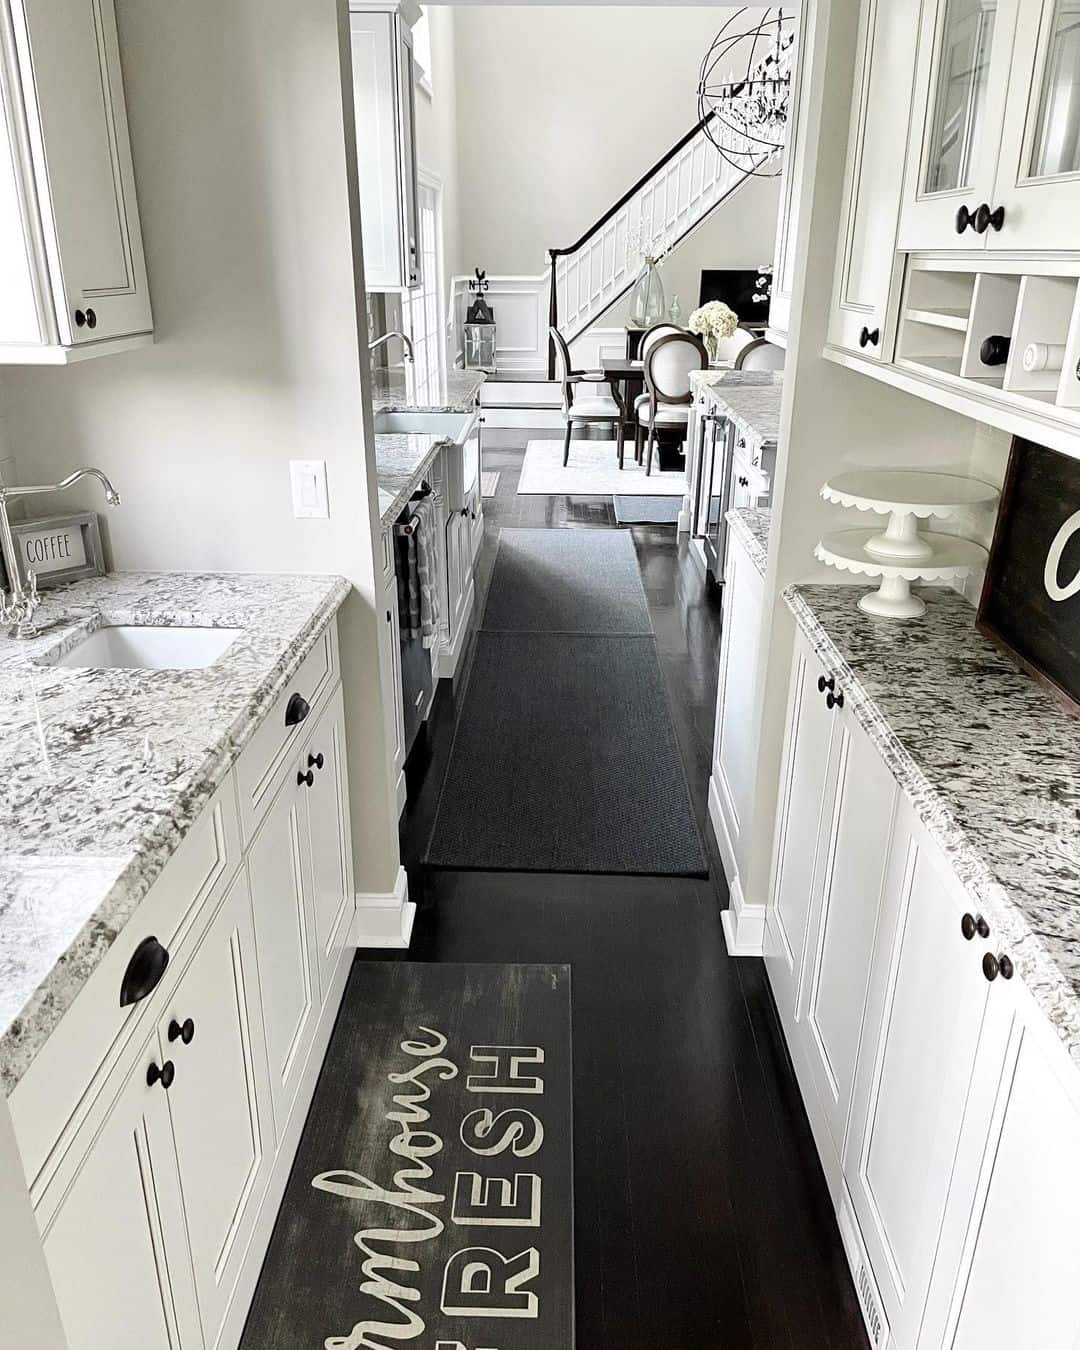 Kitchen Featuring Marble Countertop